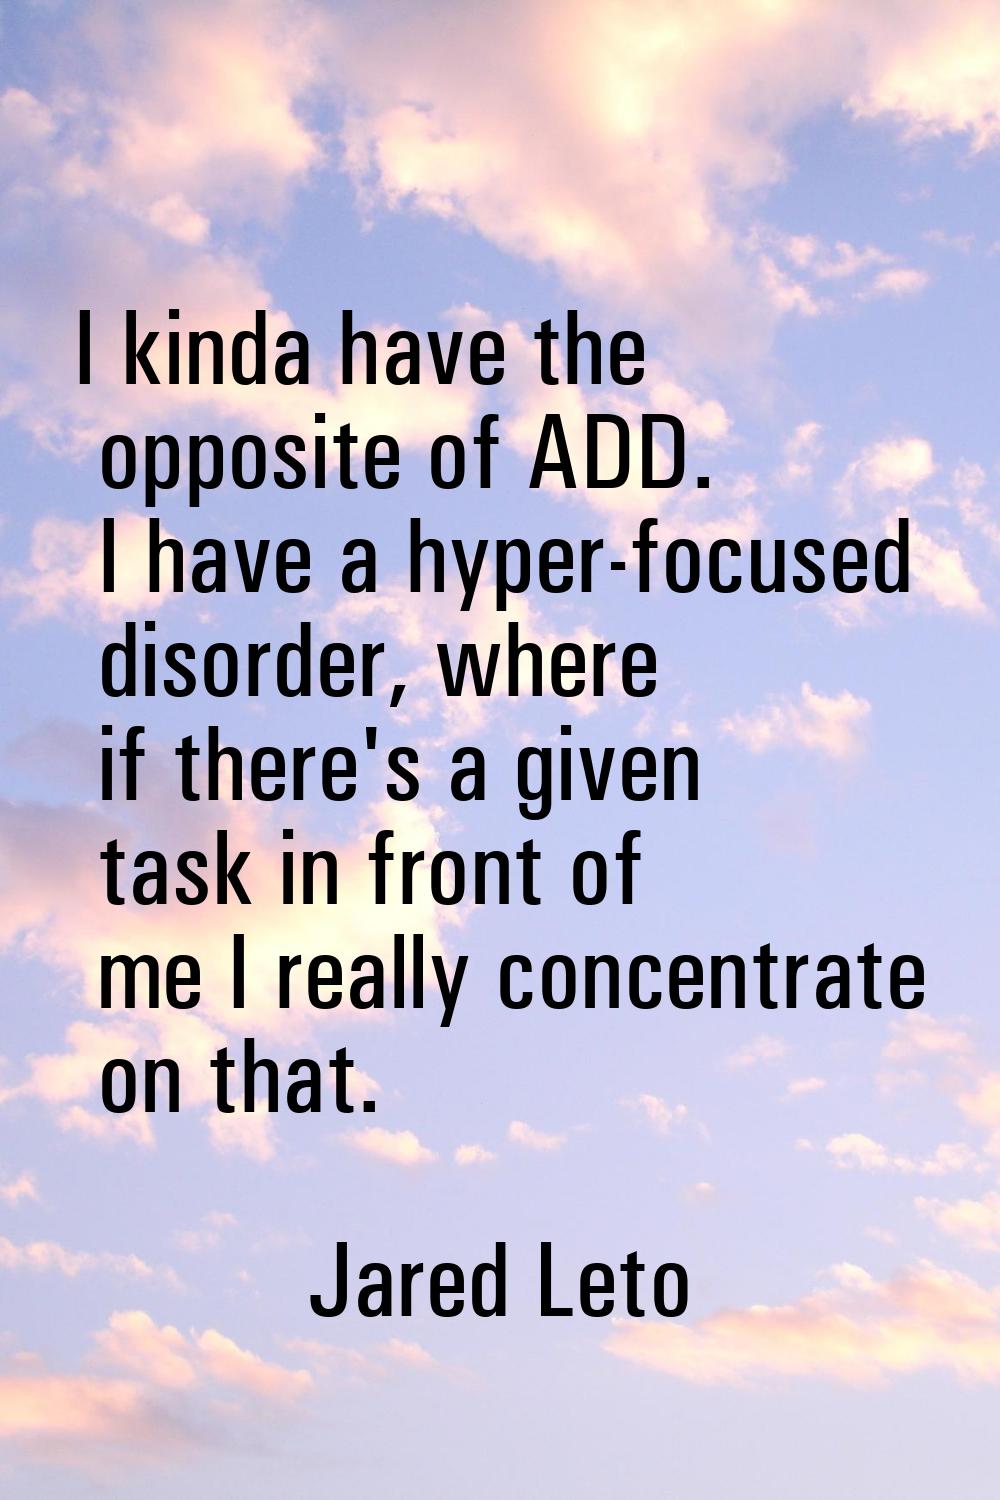 I kinda have the opposite of ADD. I have a hyper-focused disorder, where if there's a given task in